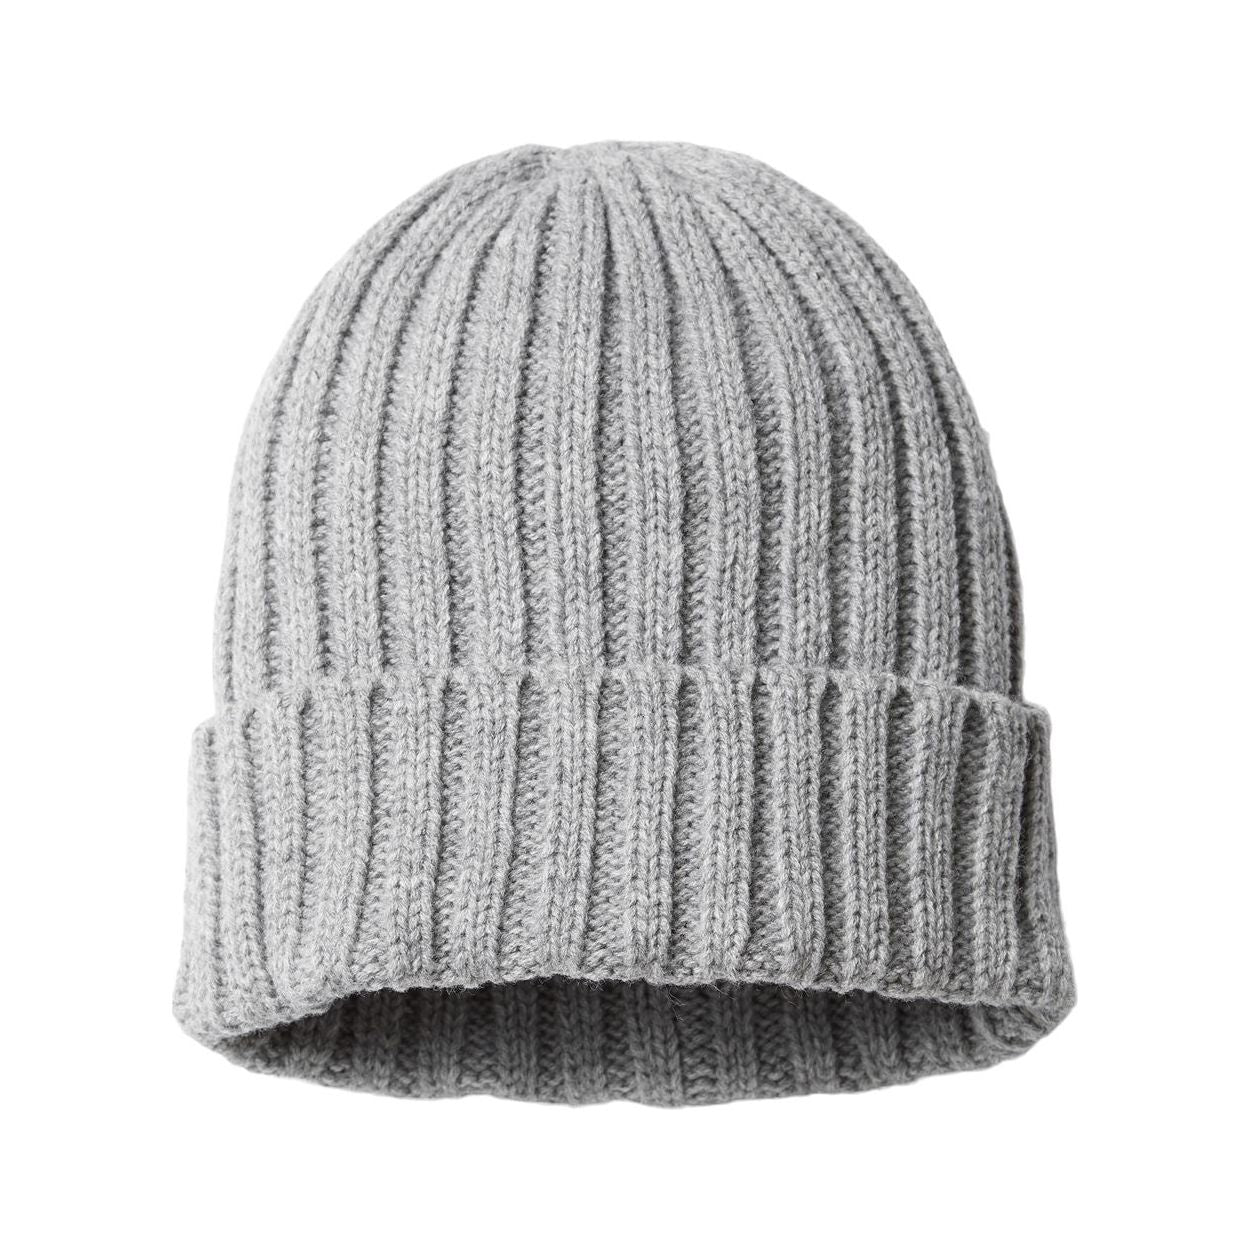 Atlantis Headwear Sustainable Cable Knit